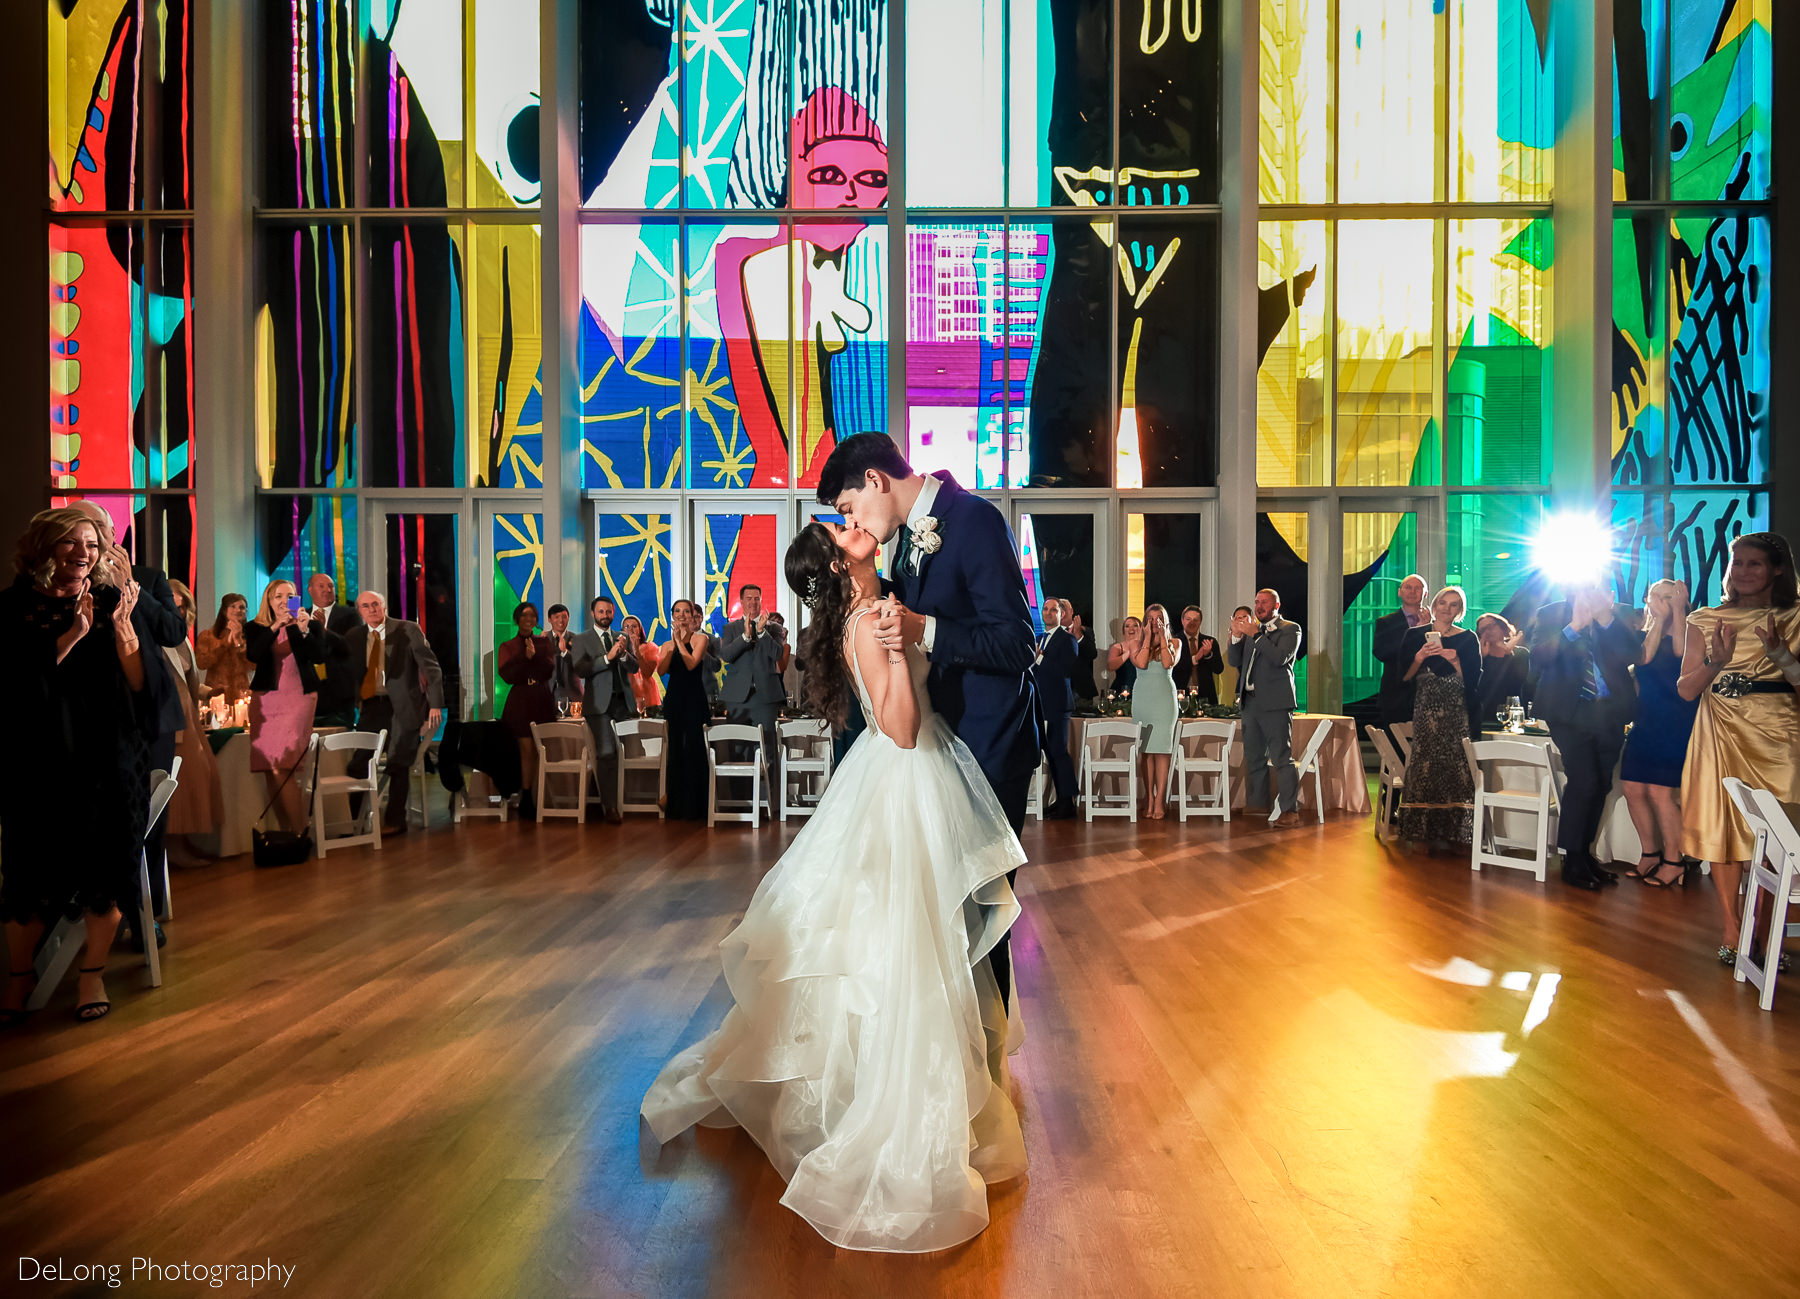 Bride-and-groom-kissing-on-dance-floor-of-their-Mint-Museum-Uptown-wedding-in-front-of-stained-glass-art-installation